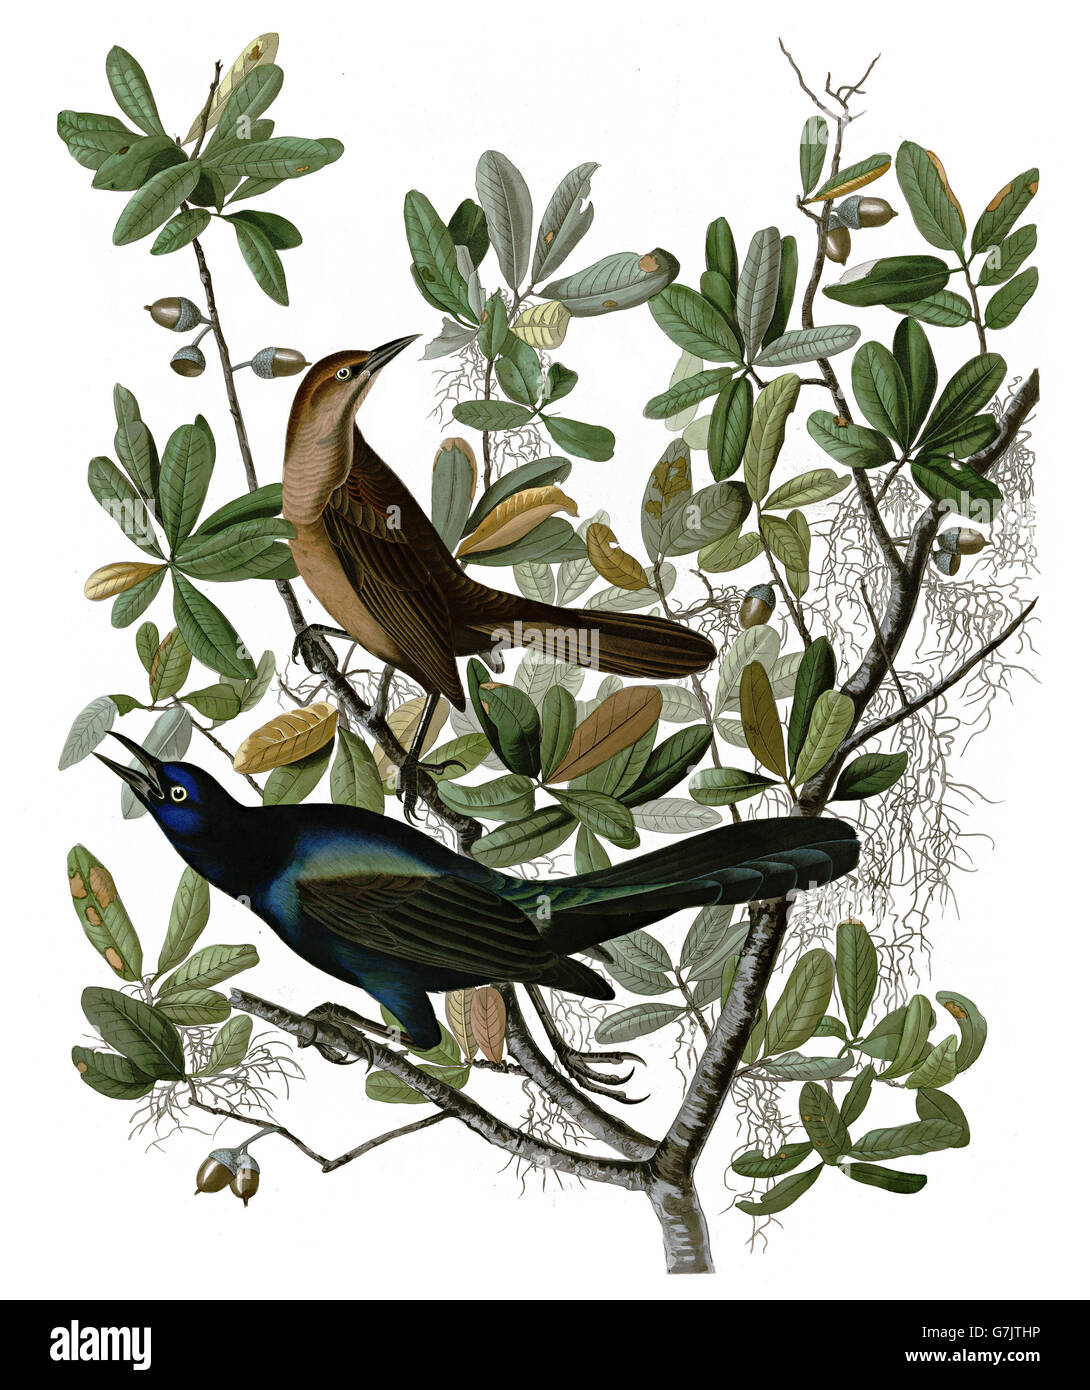 Boat-tailed Grackle, Quiscalus major, birds, 1827 - 1838 Stock Photo